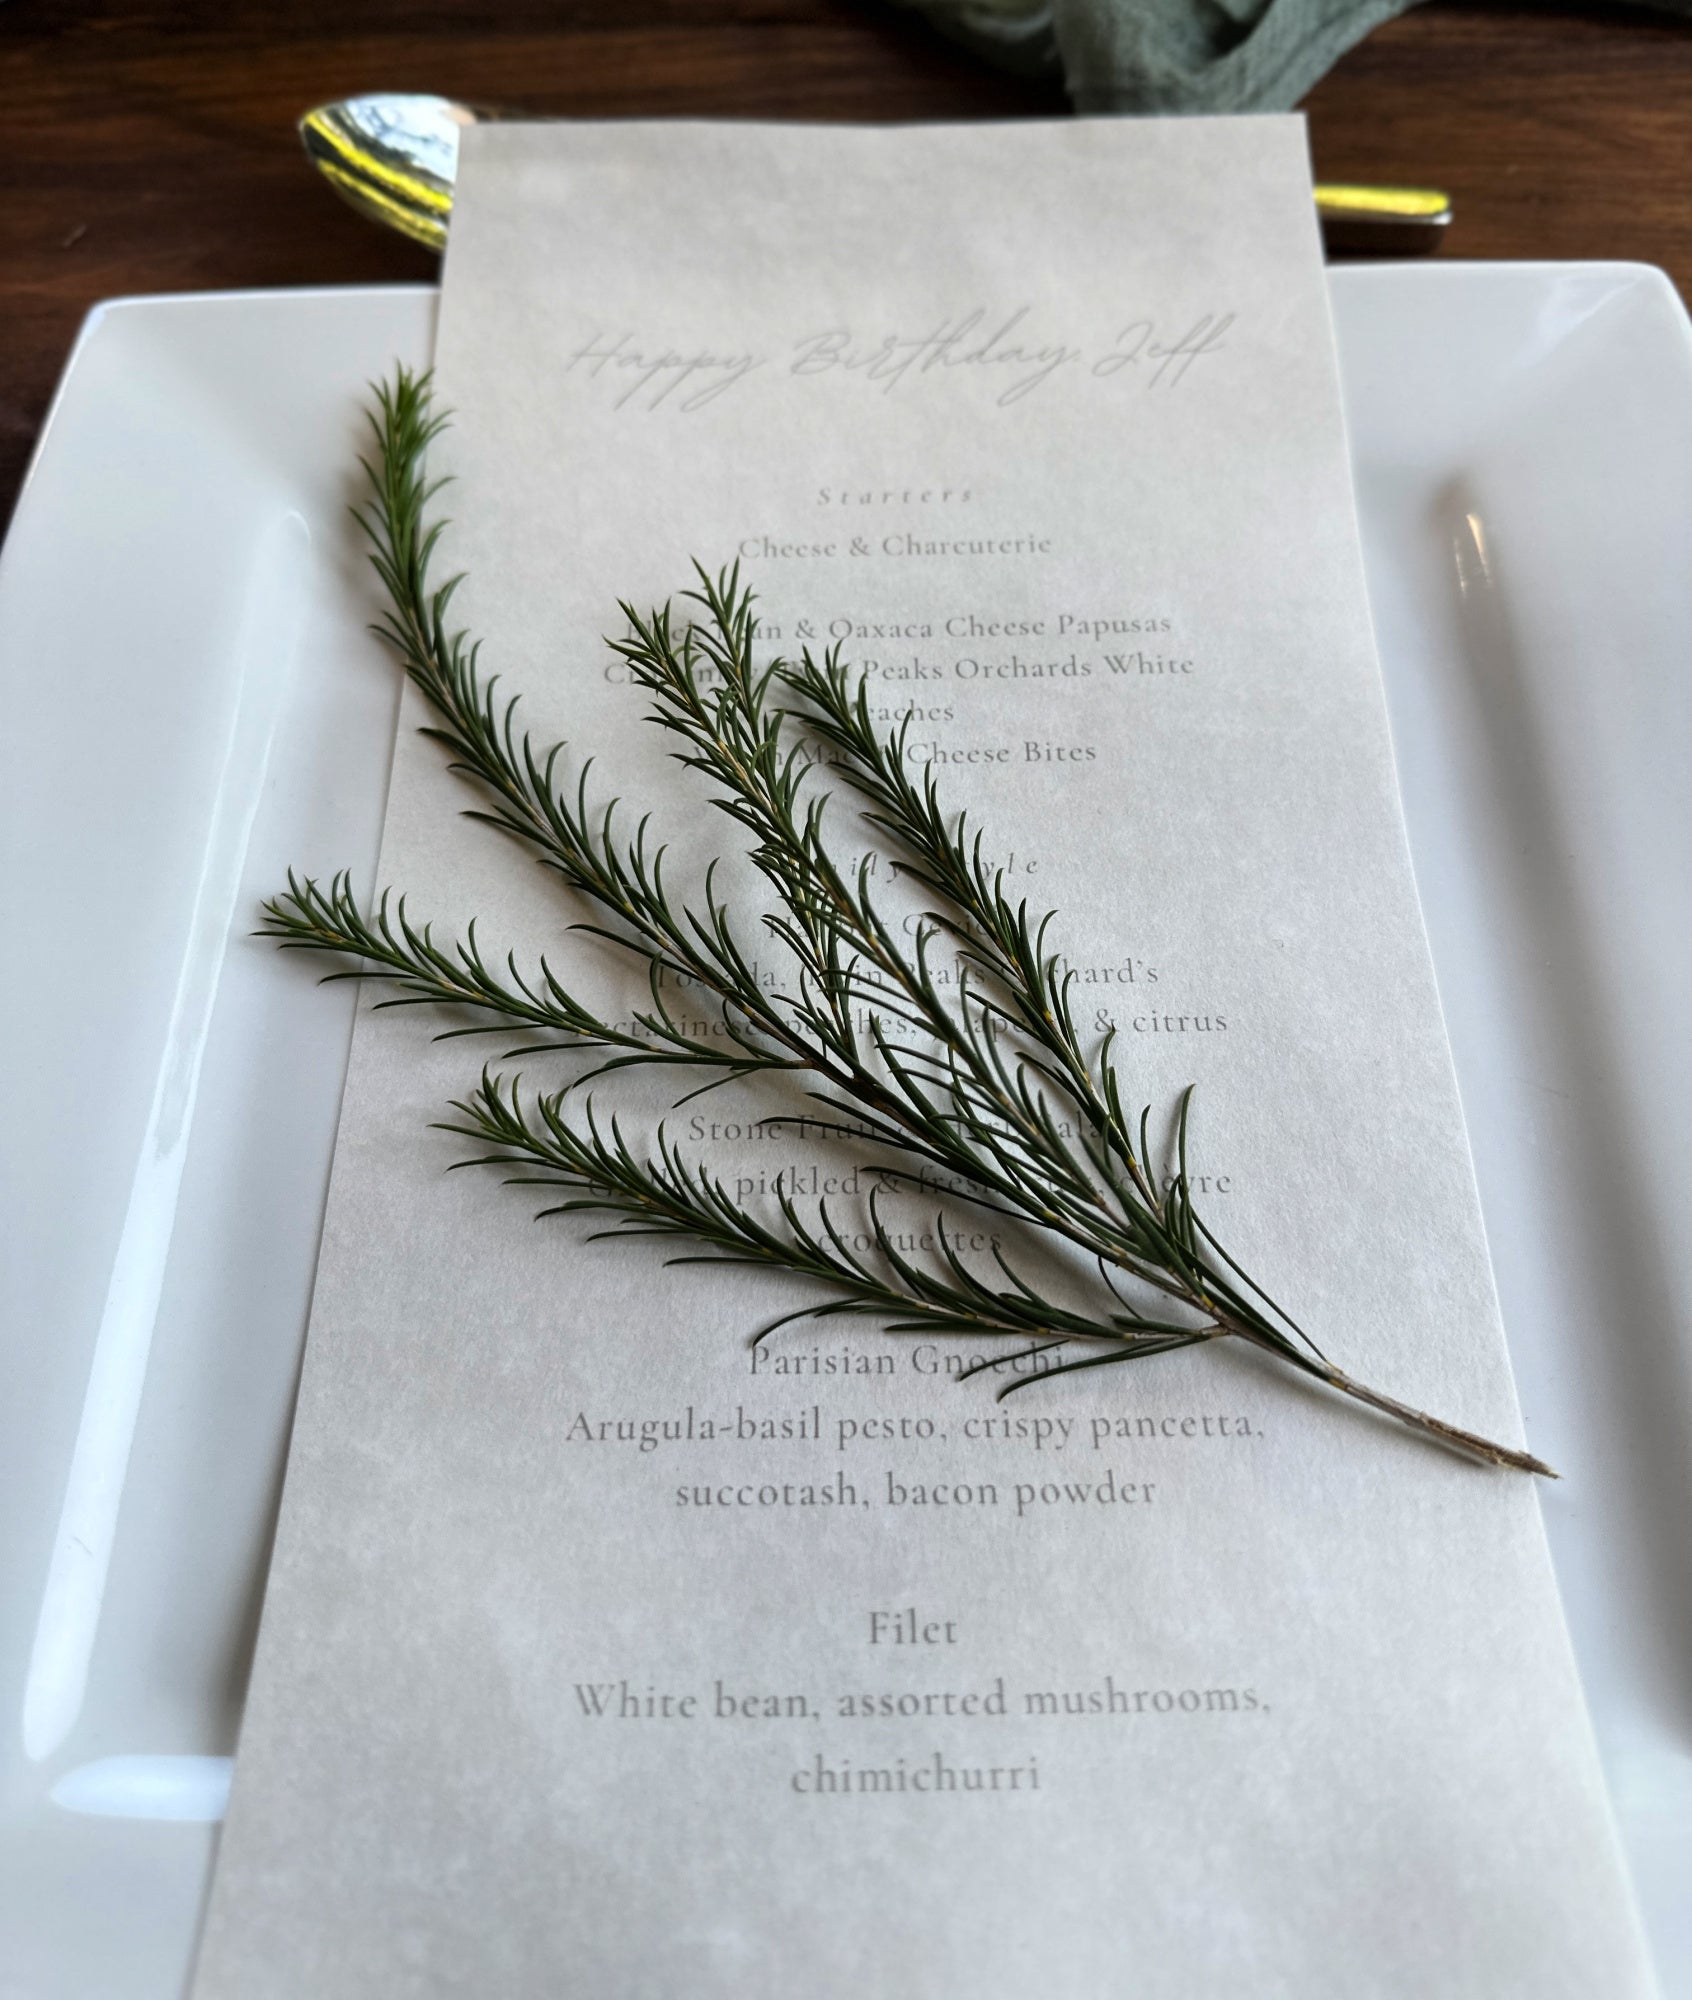 Shef Madres Catering Customized Birthday menu for local Sacramento Resident